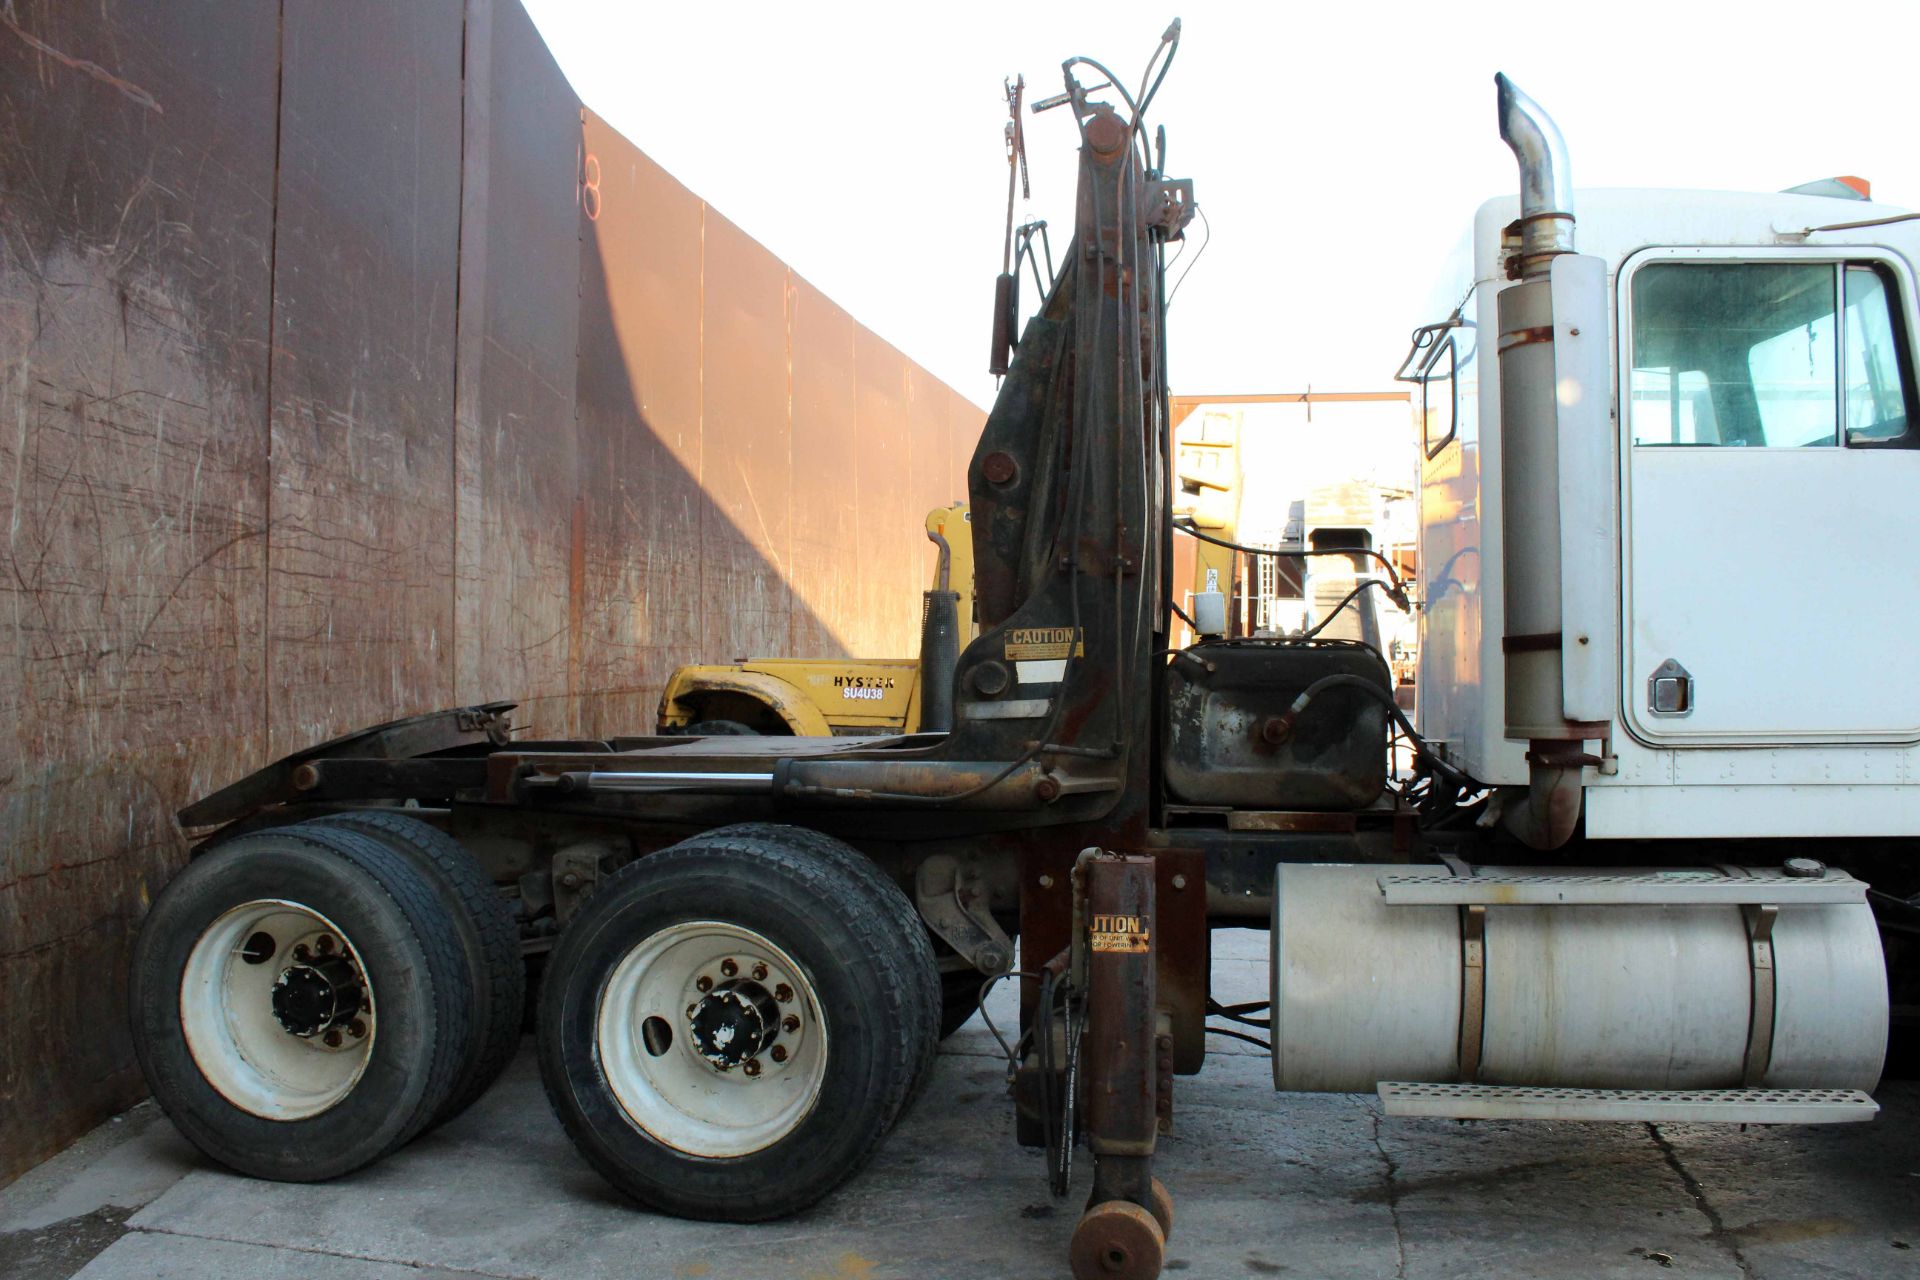 TILT LIFT TRACTOR, KENWORTH, new 1988, Odo: 740,000 miles, Chassis No. M515122 - Image 5 of 7